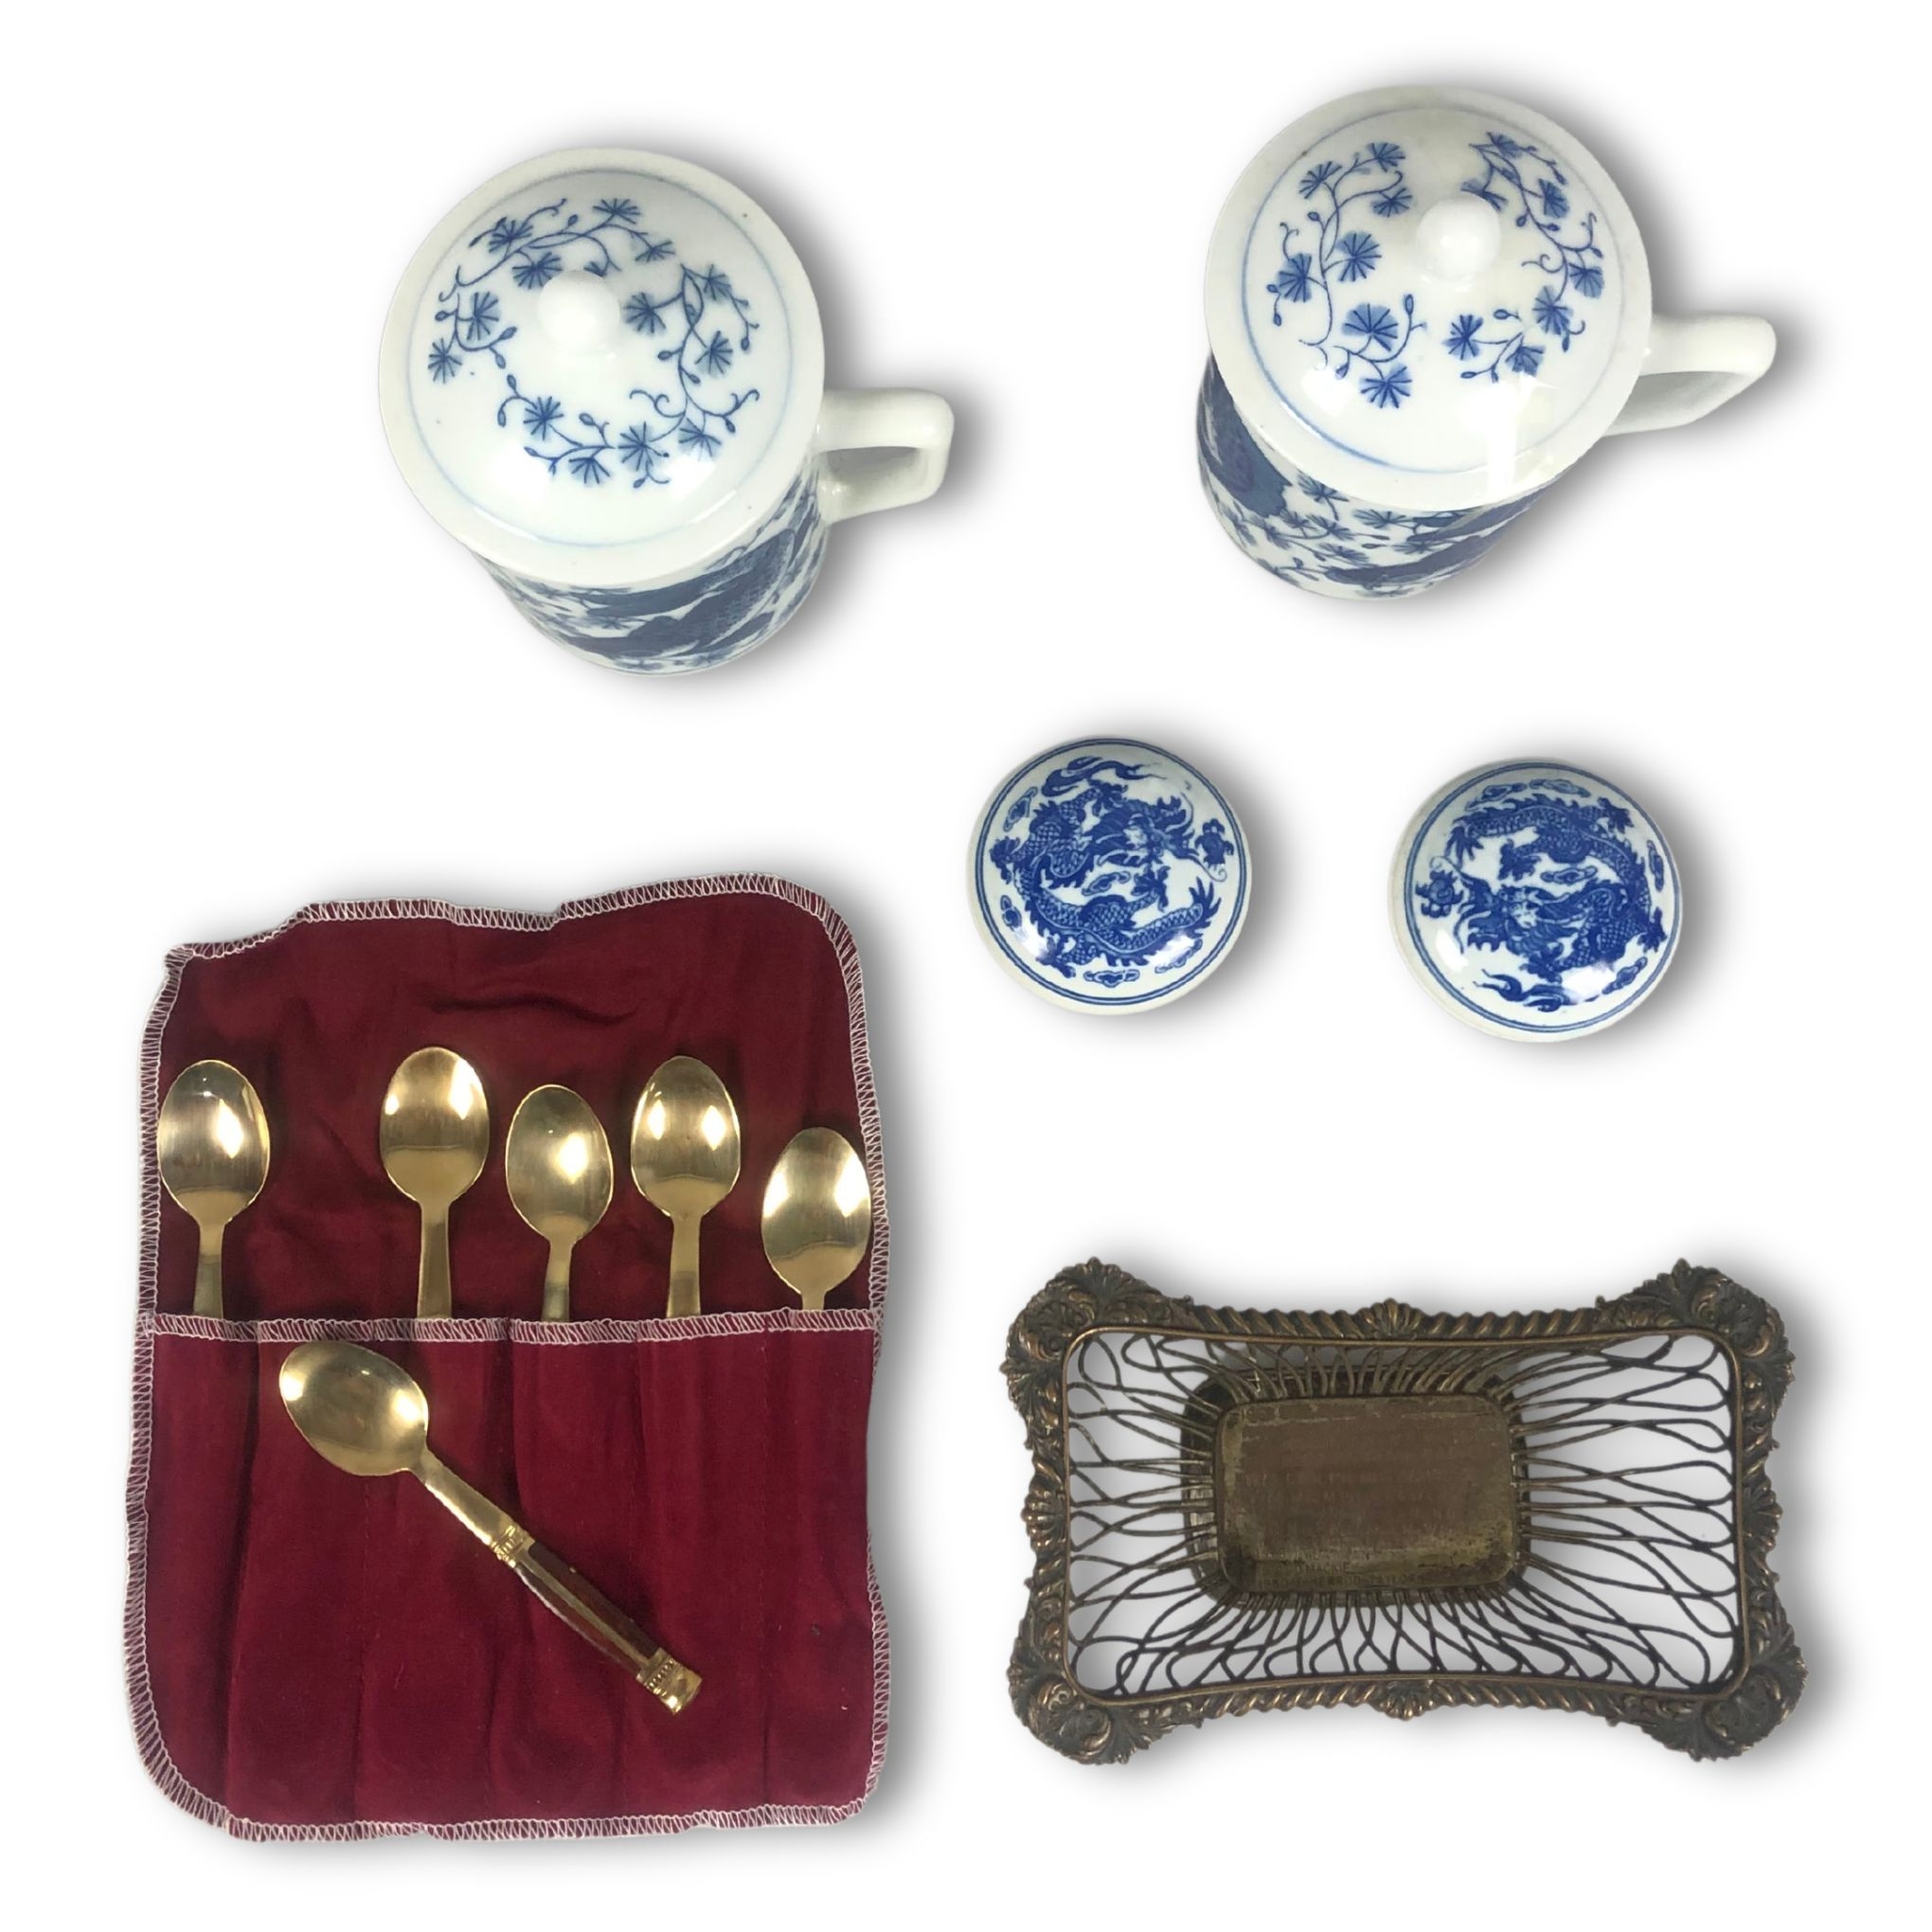 Oriental Themed Blue & White Lidded Mugs and Trinket Boxes with Collectors Spoons & Silver Plate Ite - Image 3 of 5